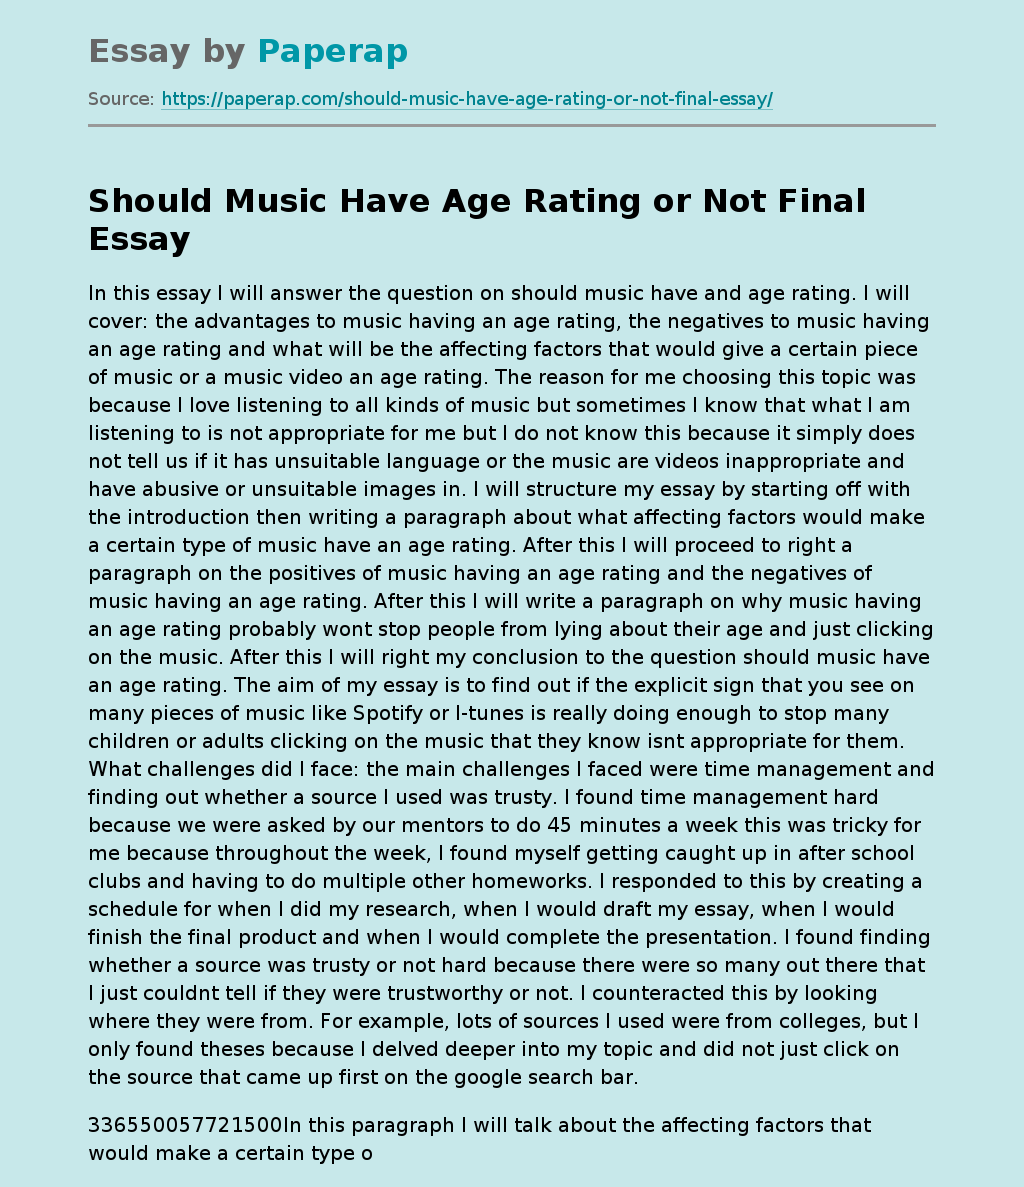 Should Music Have Age Rating or Not Final